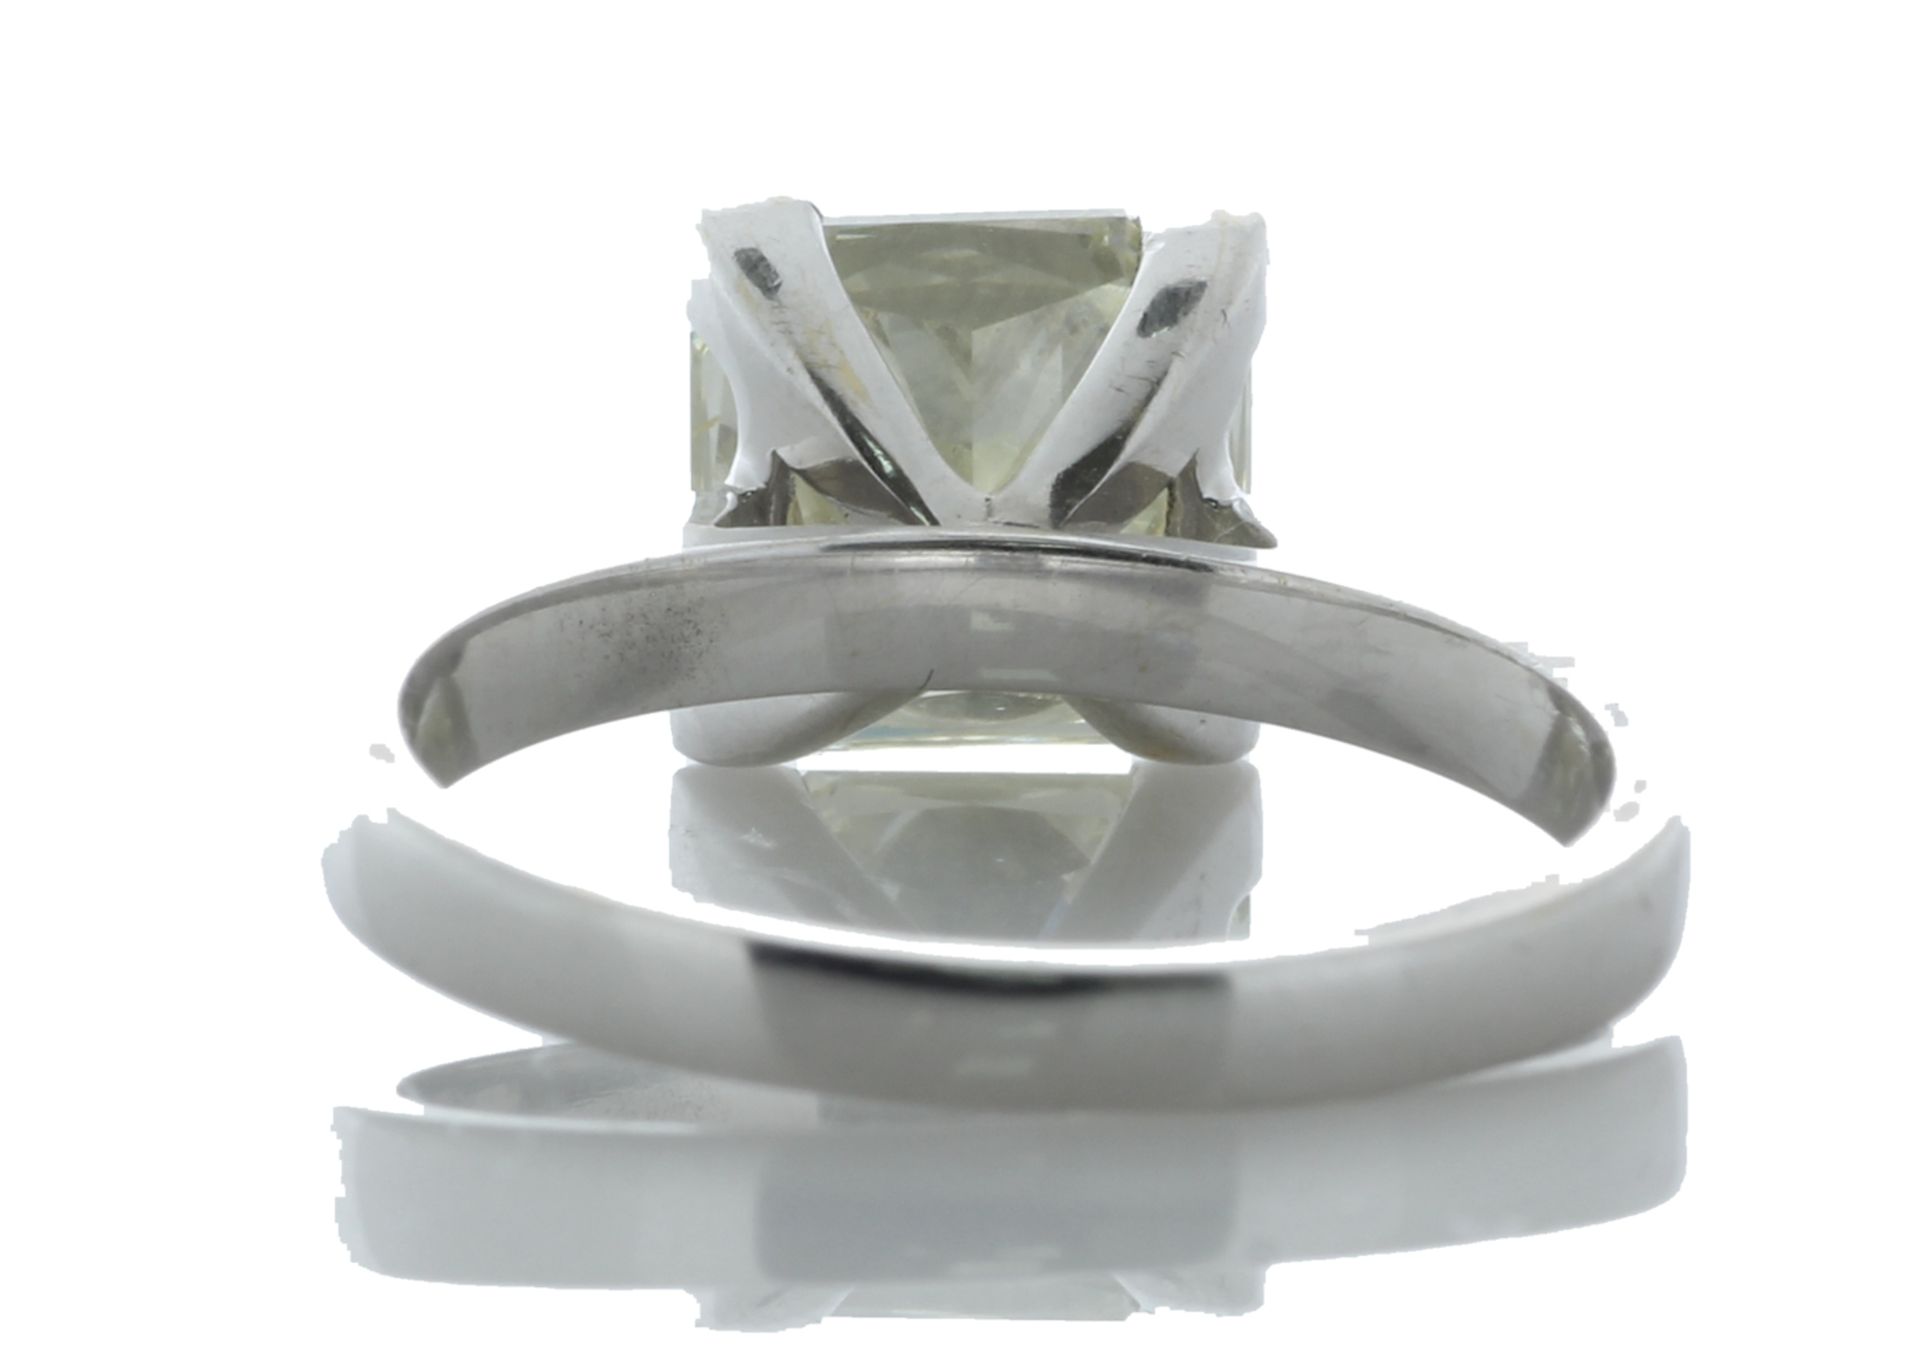 18ct White Gold Single Stone Radiant Cut Diamond Ring 3.02 Carats - Valued by GIE £89,540.00 - - Image 4 of 5